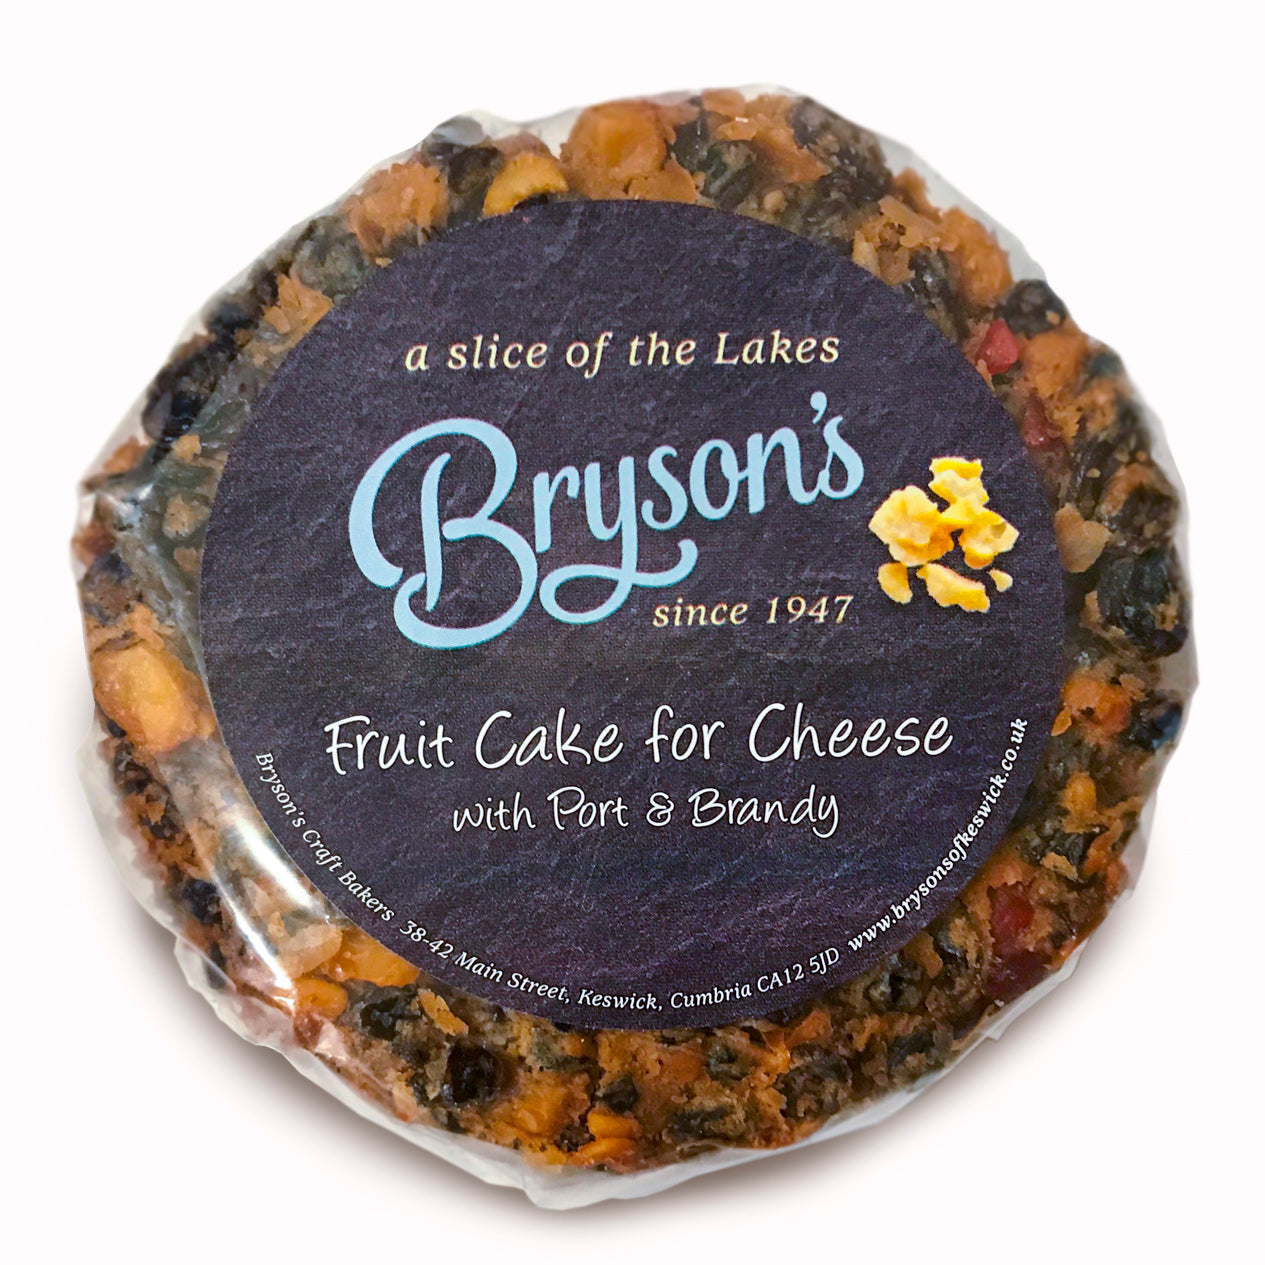 Bryson's Fruit Cake for Cheese product. Made with Port and Brandy